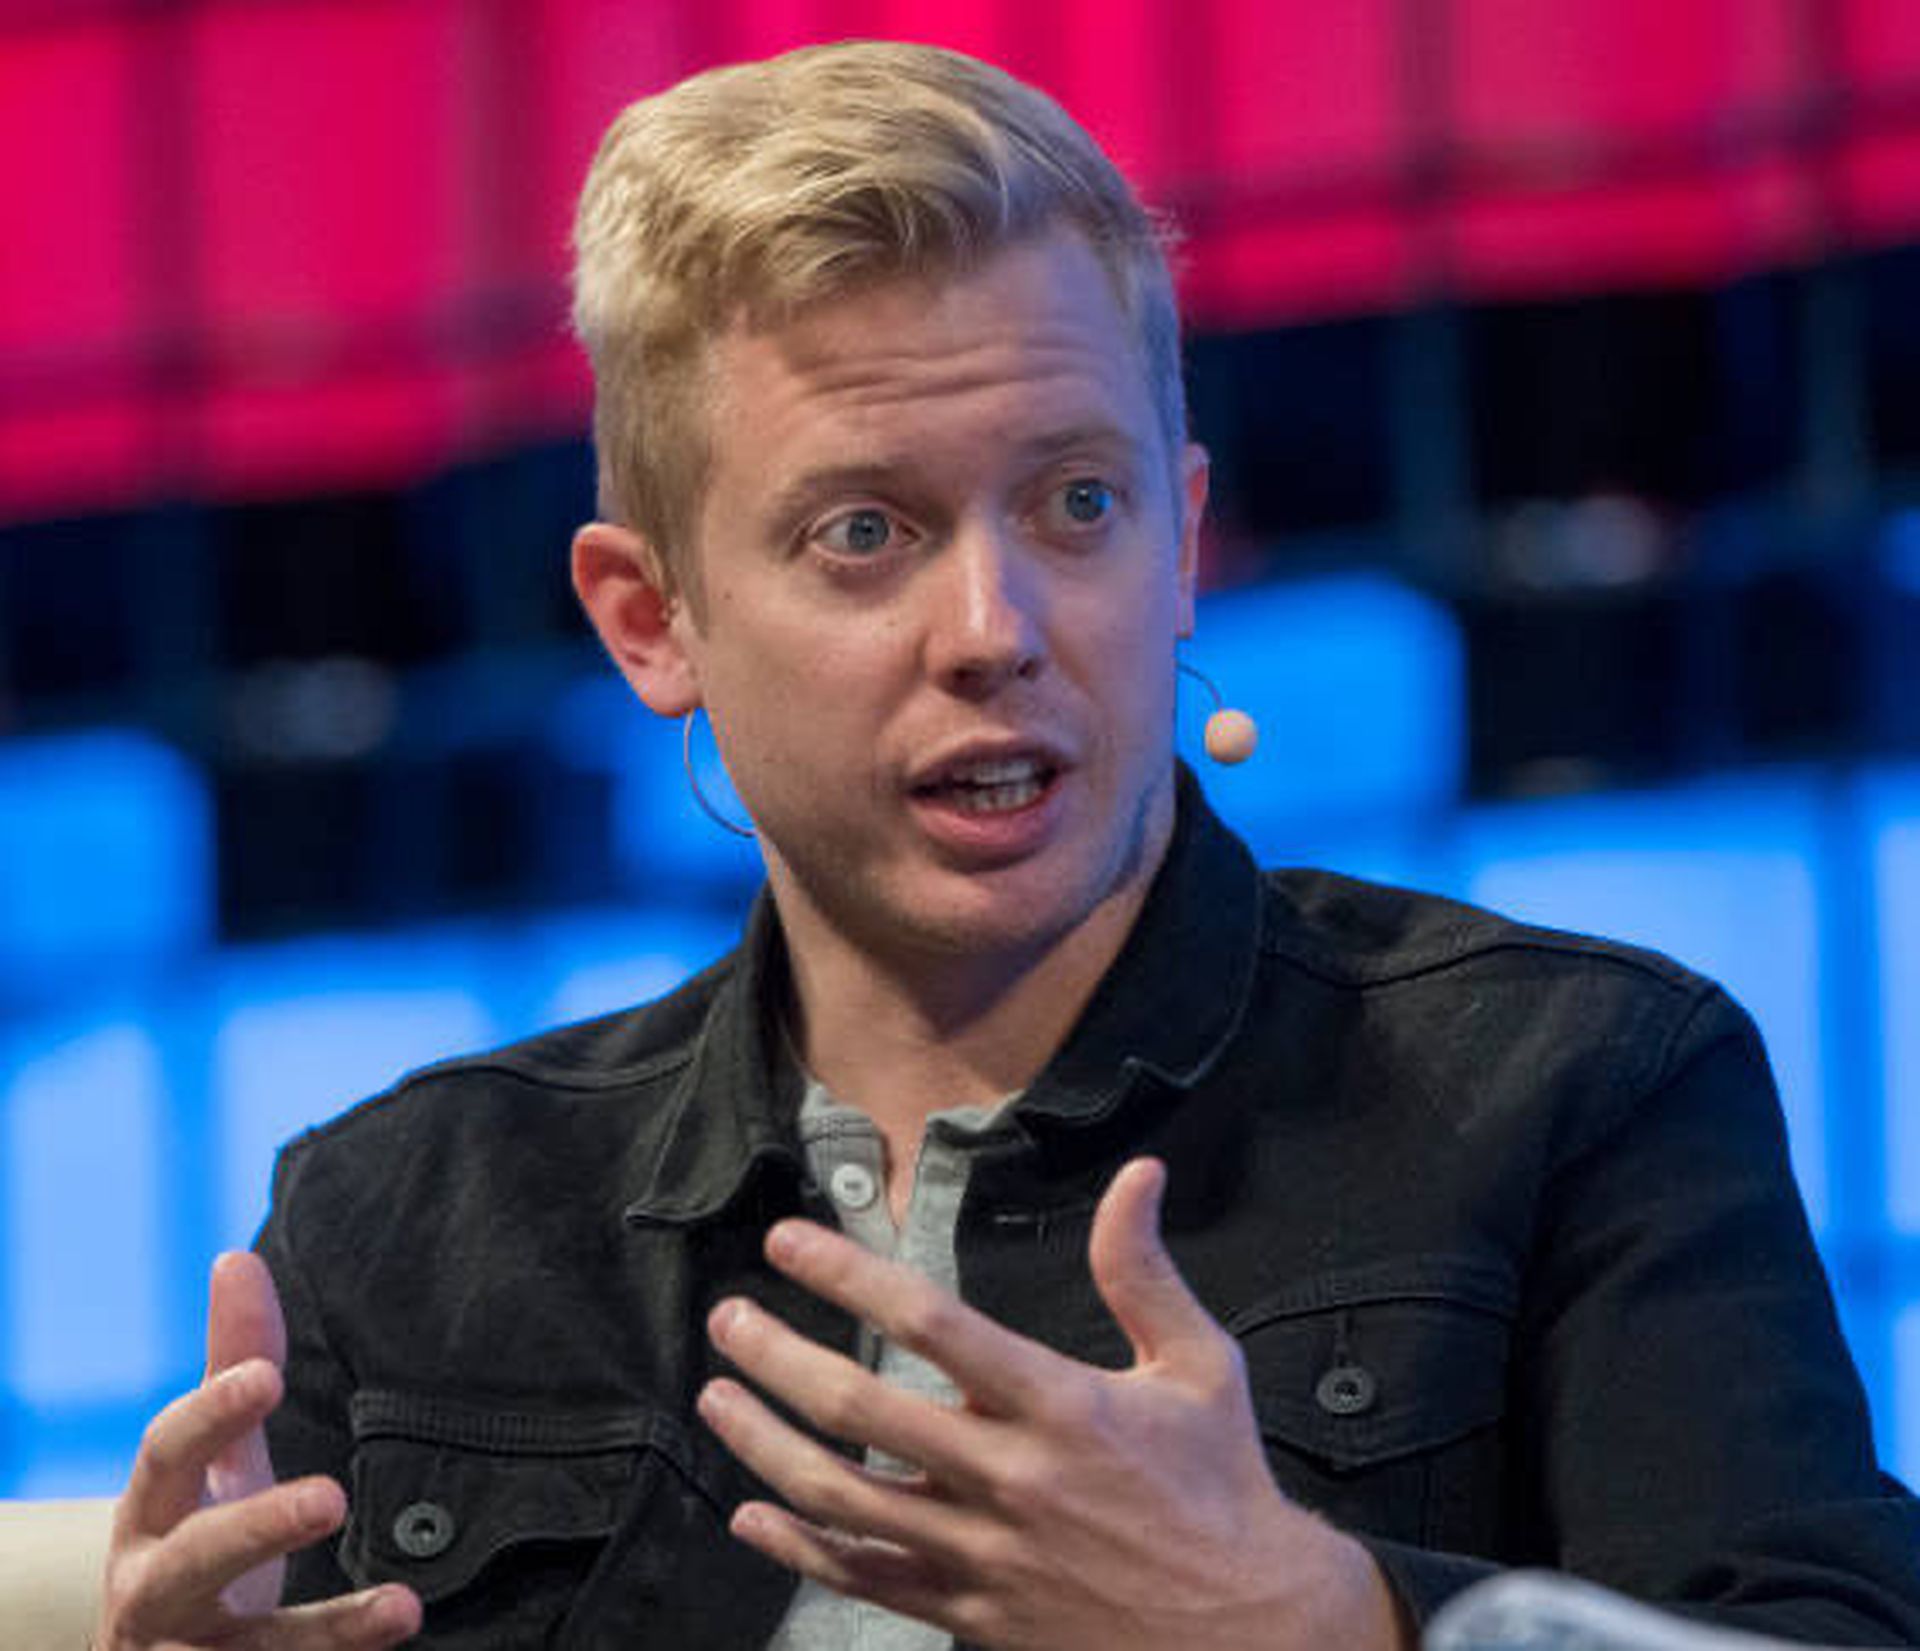 Steve Huffman CEO at Reddit, delivers remarks during the Web Summit in Altice Arena on November 08, 2017 in Lisbon, Portugal. (Photo by Horacio Villalobos &#8211; Corbis/Getty Images)